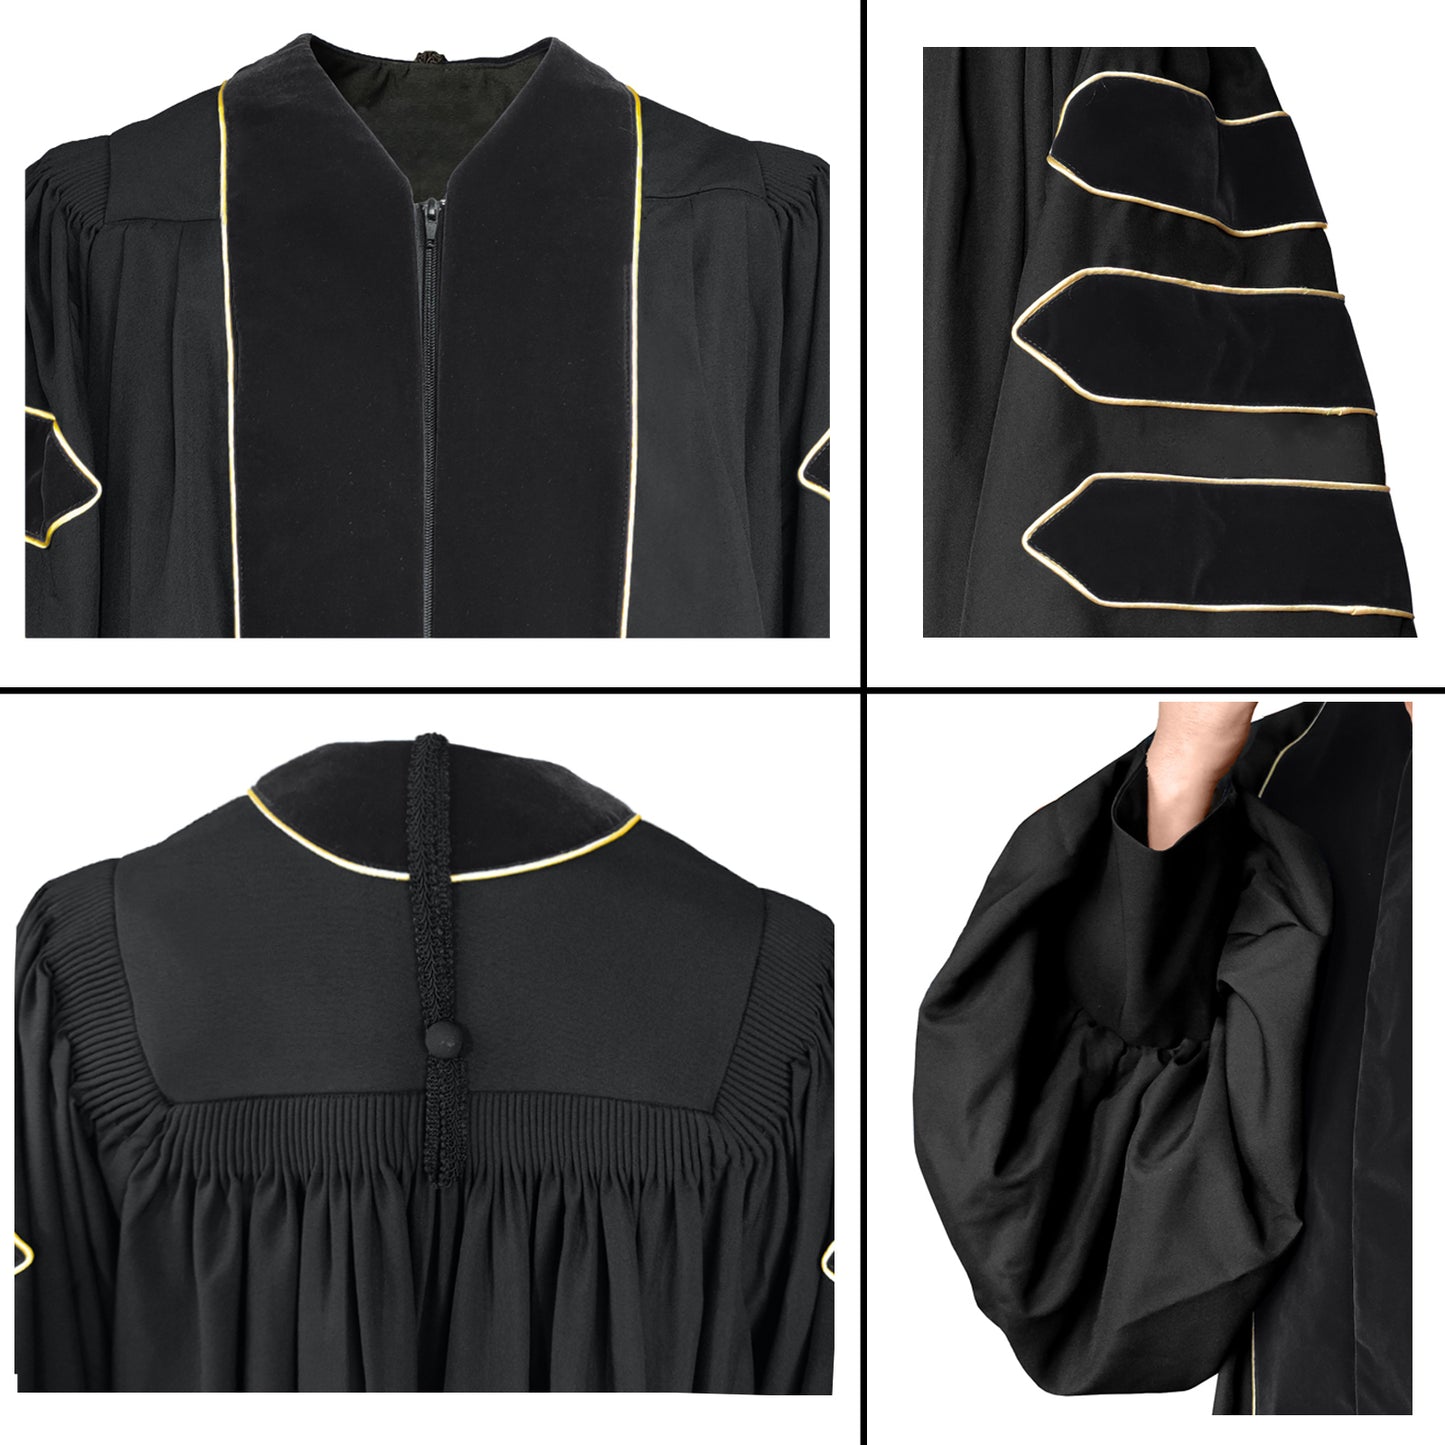 Deluxe Doctoral Graduation Gown/PHD Gown/Doctoral Regalia for Professor or Faculty with Gold Piping-CA graduation